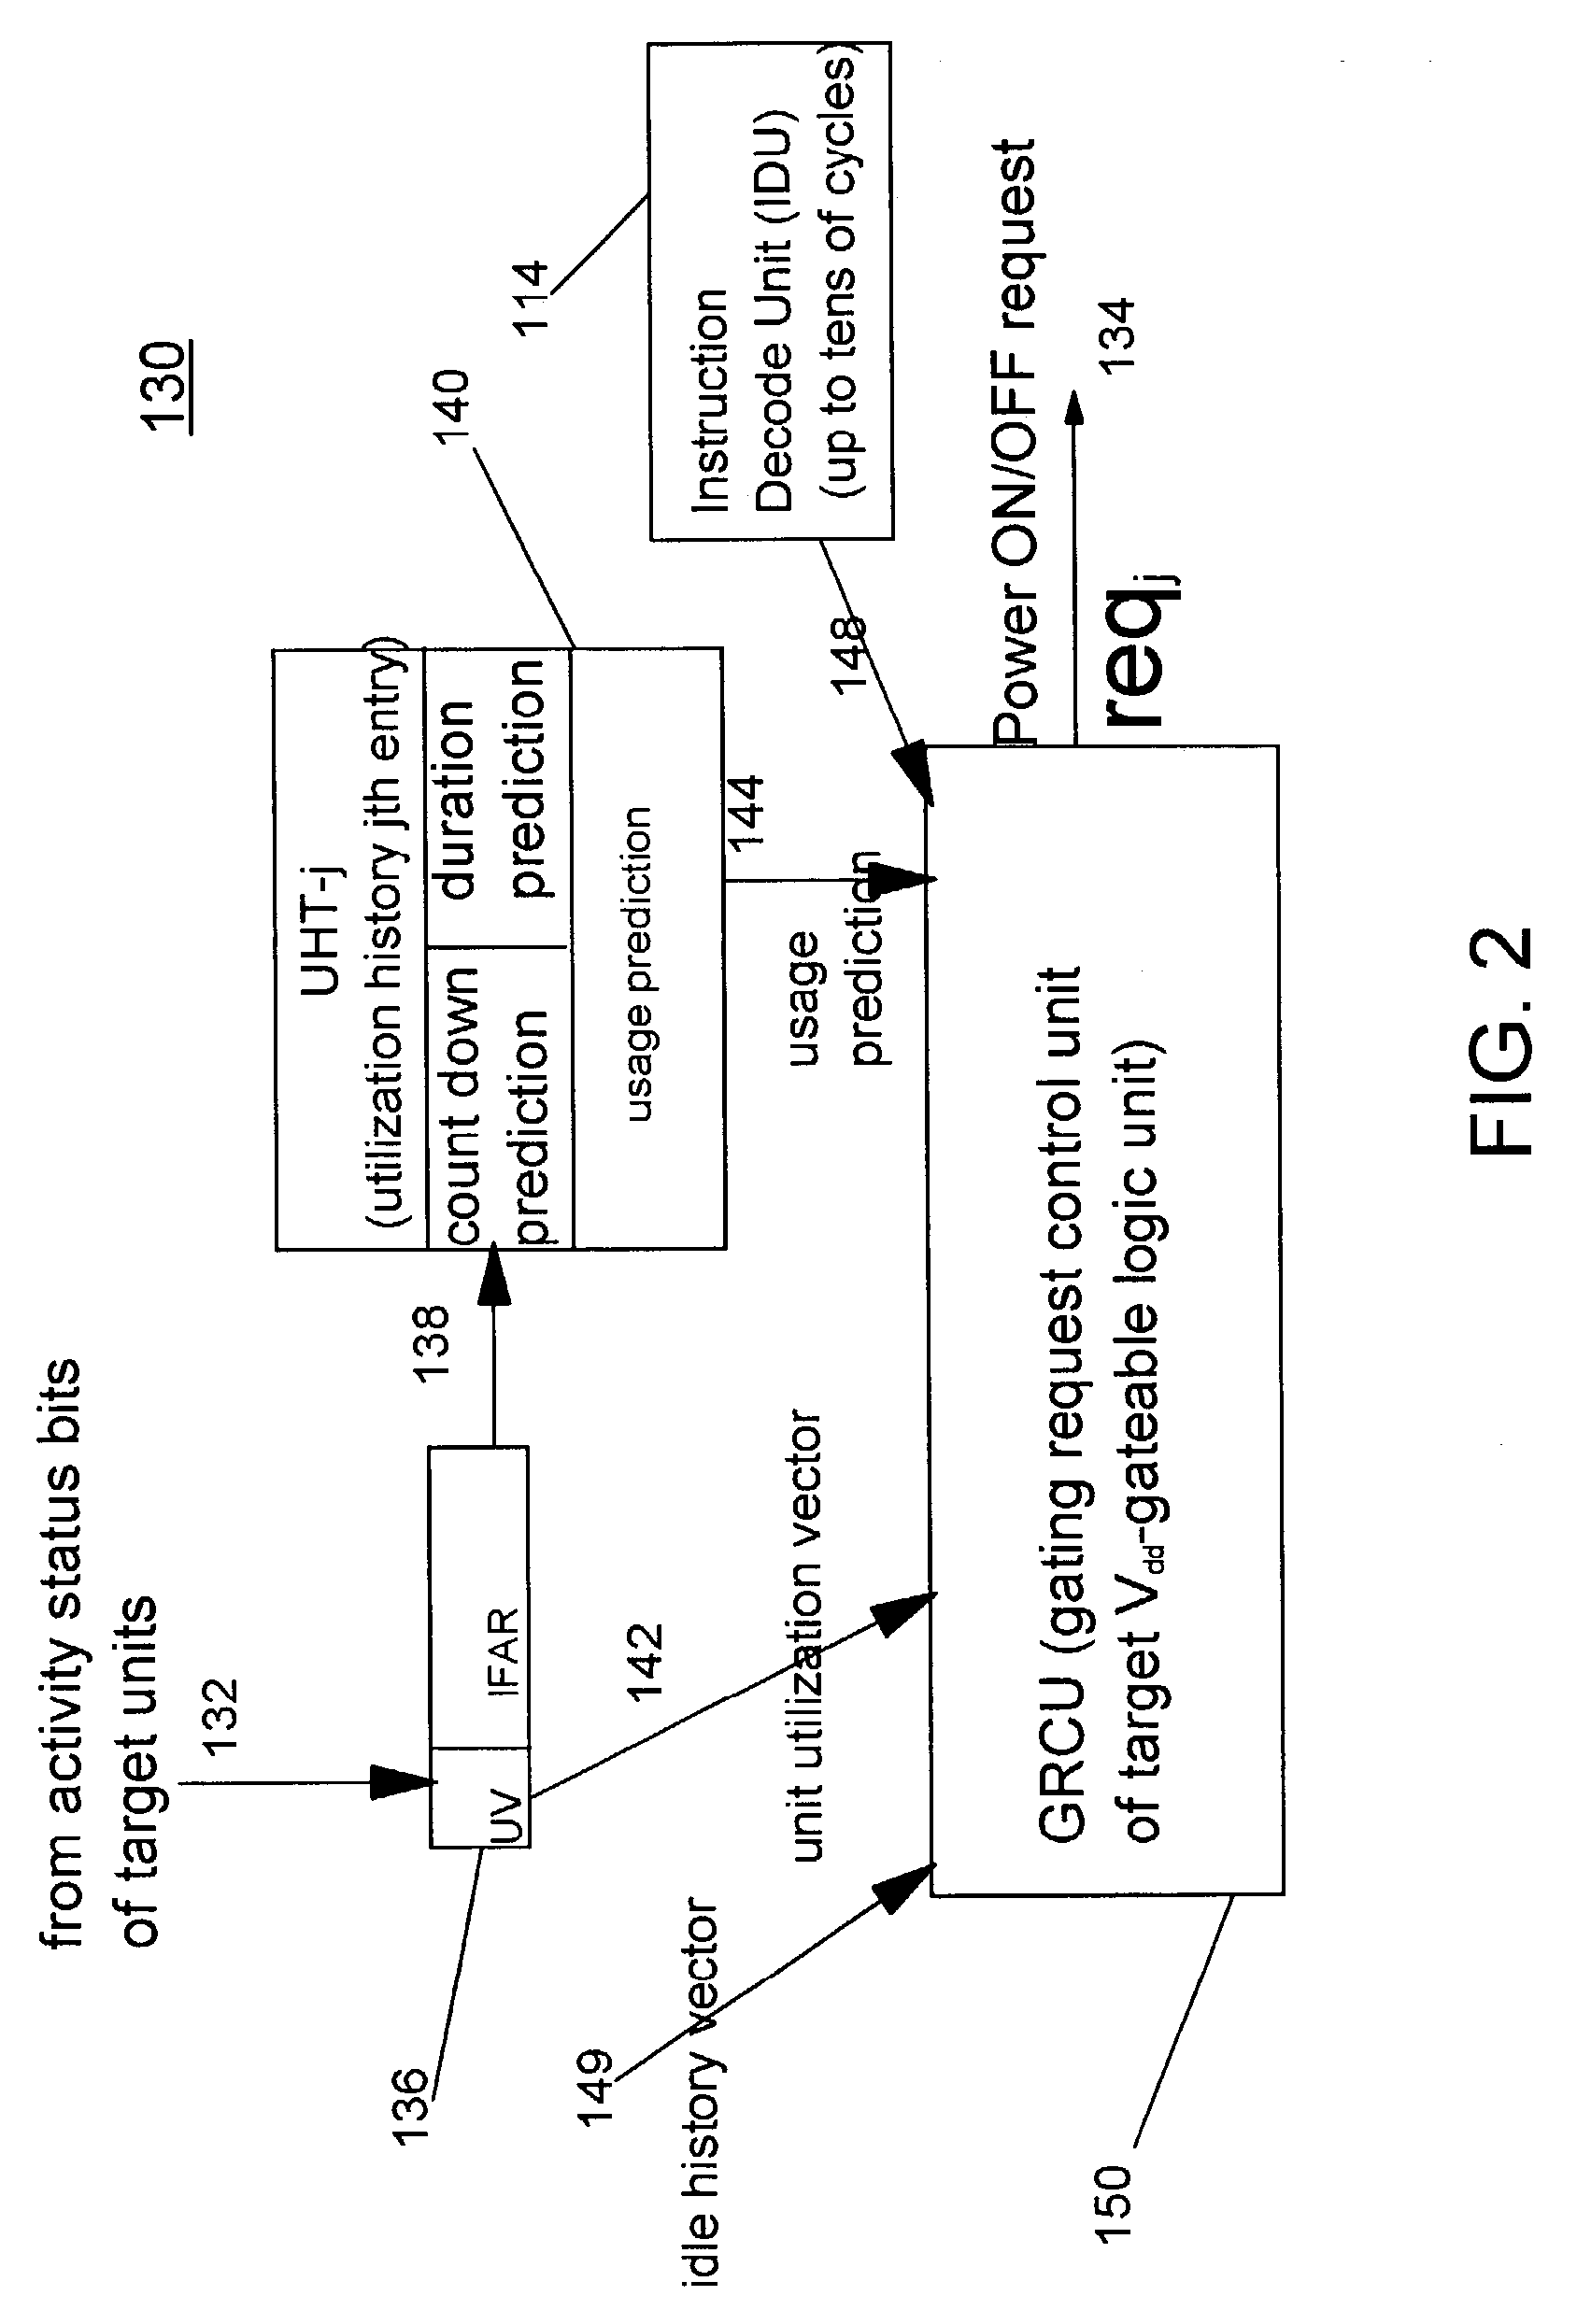 Processor with low overhead predictive supply voltage gating for leakage power reduction